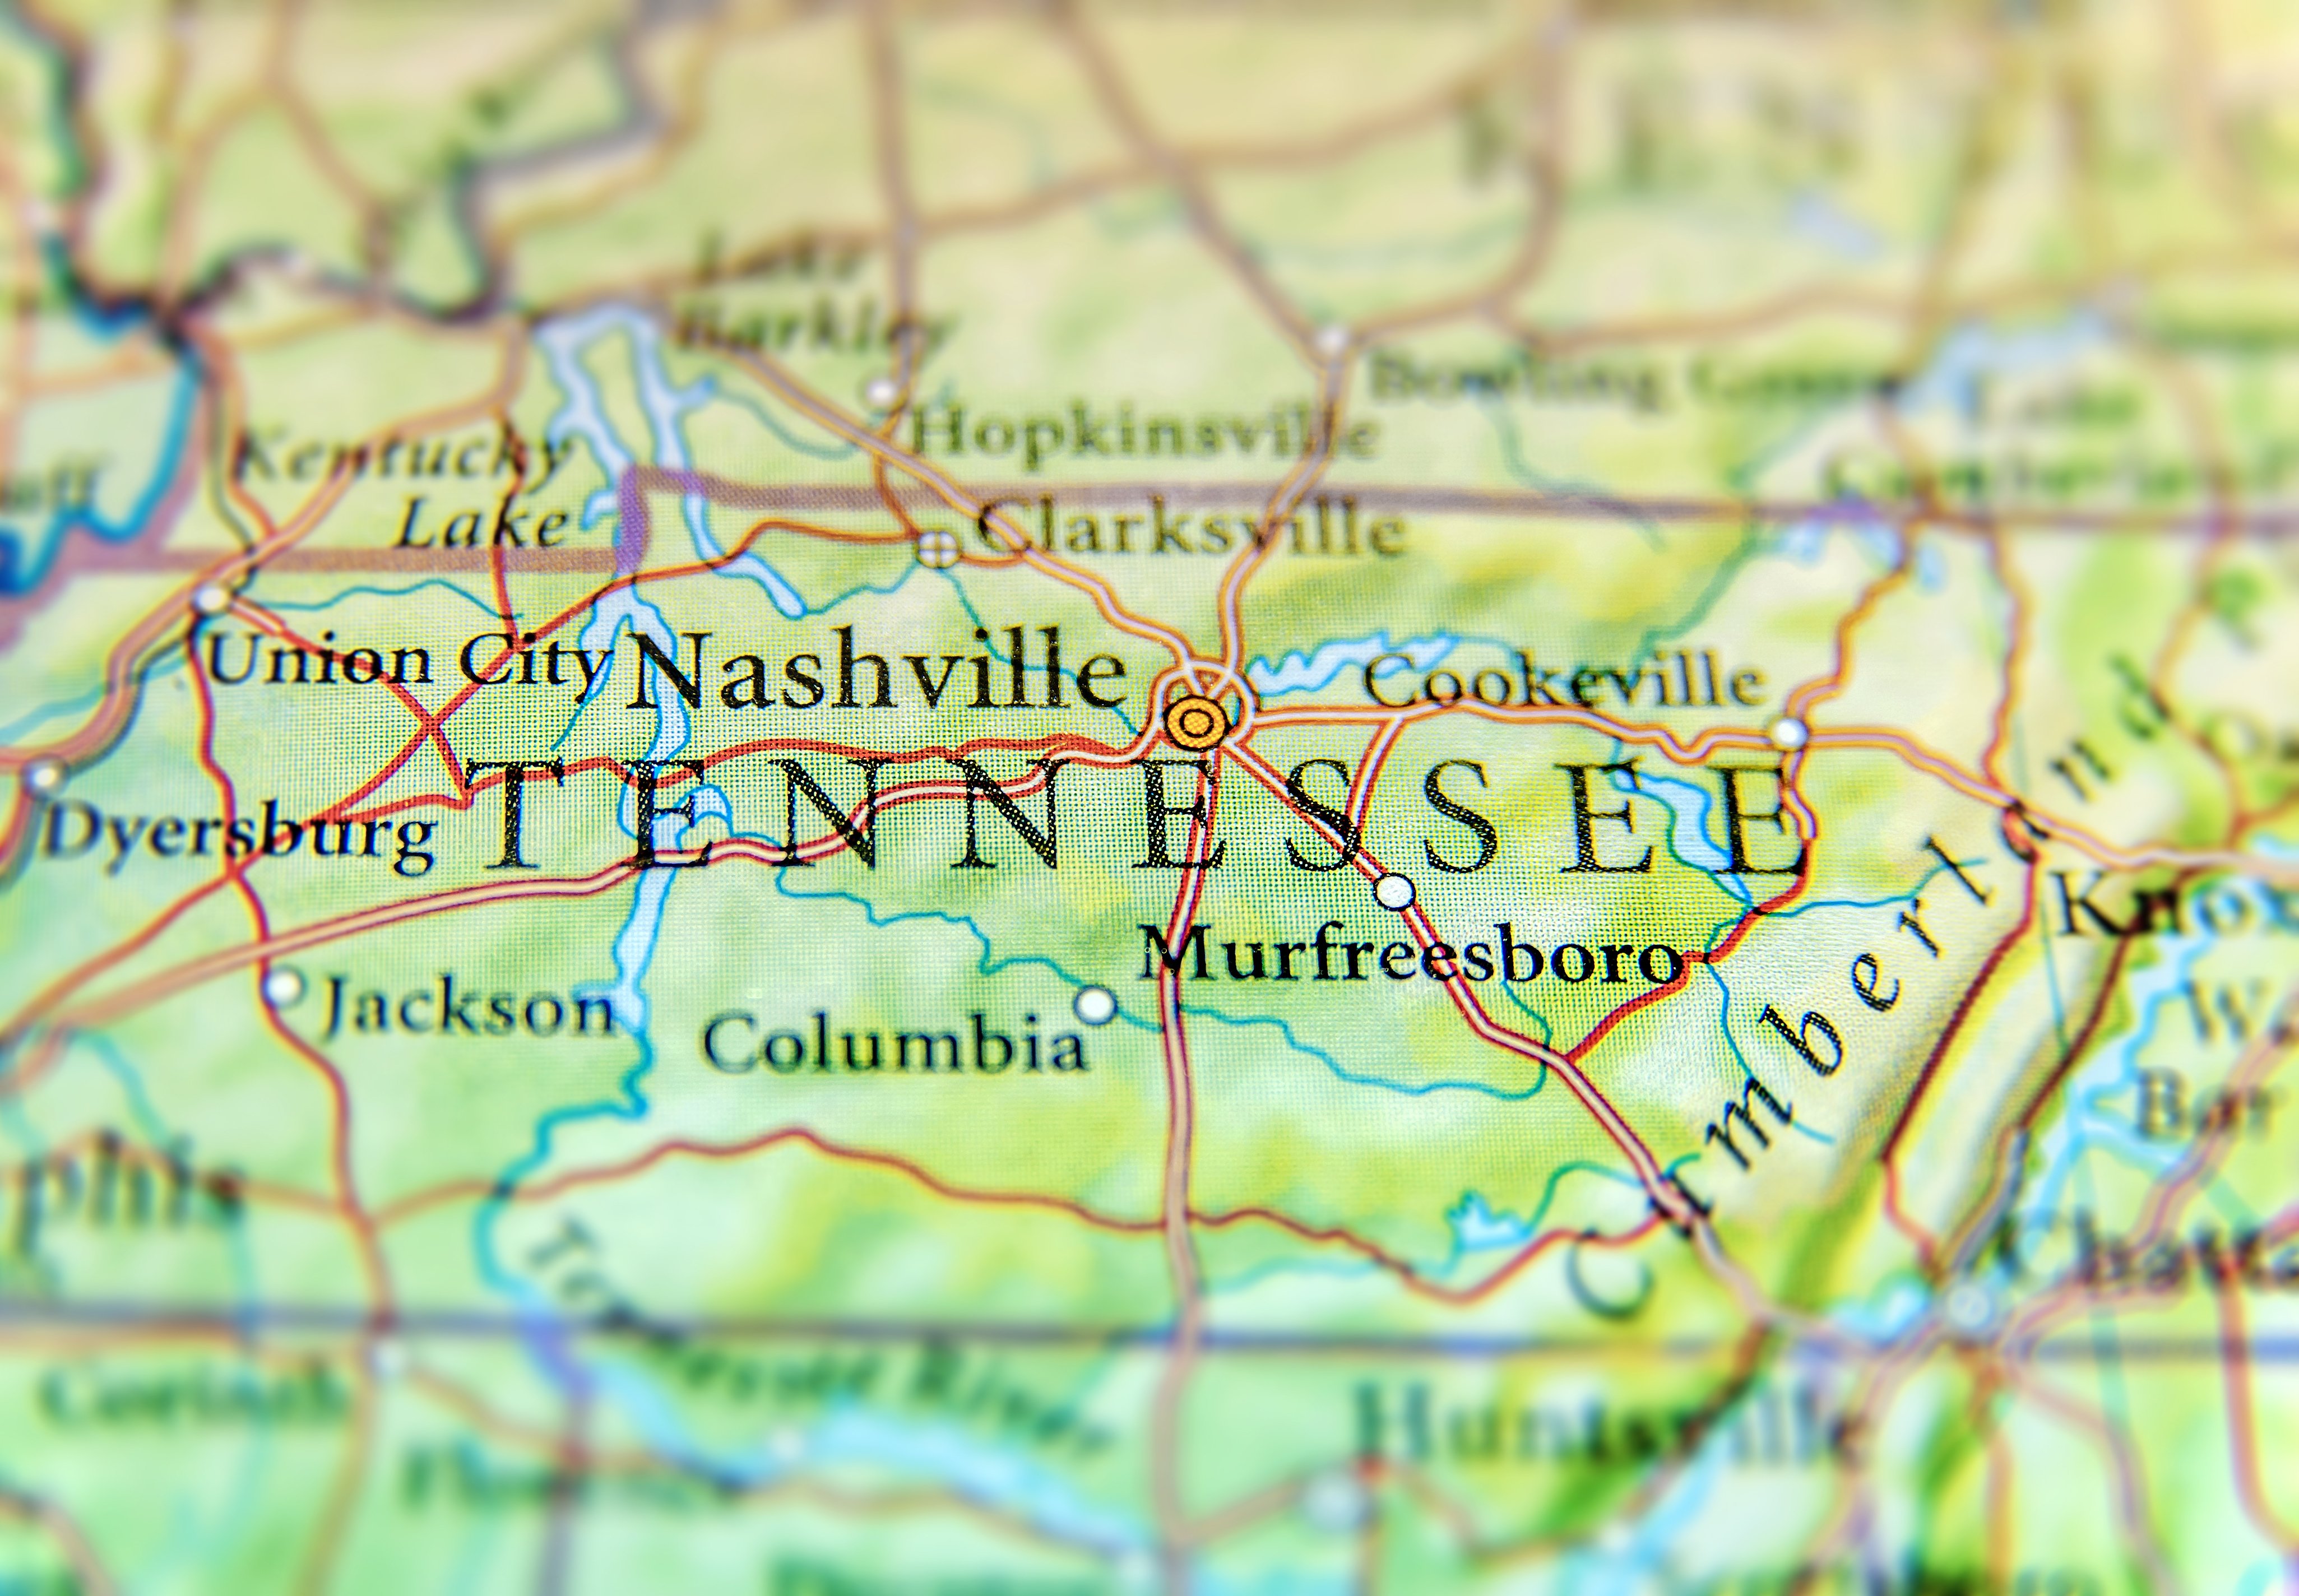 A map showing the state of Tennessee